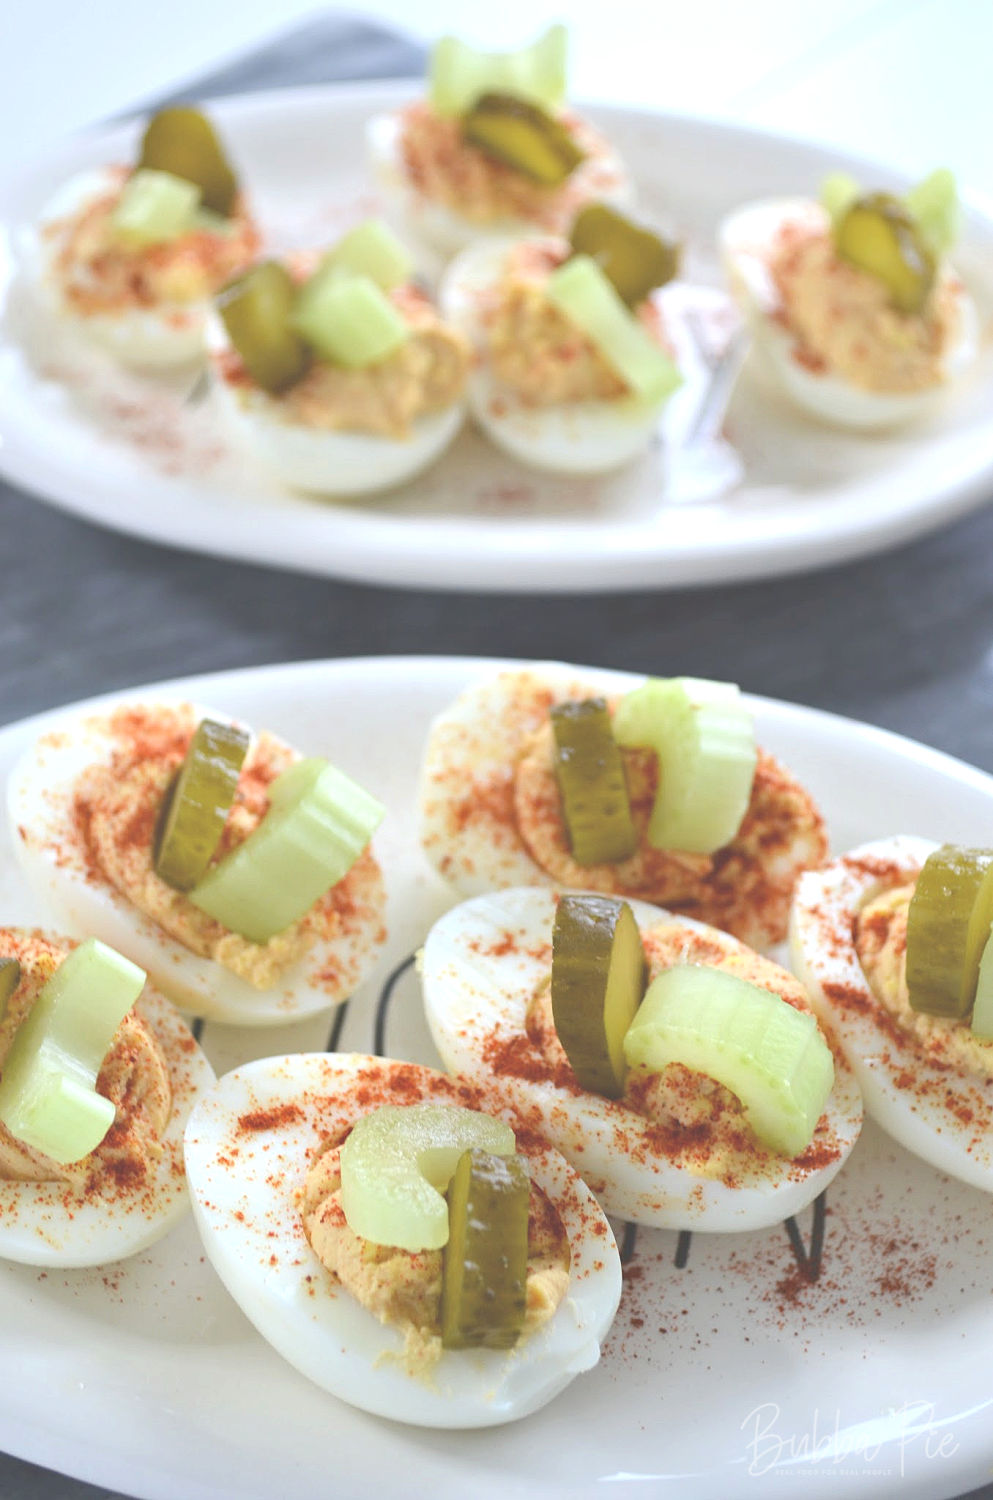 Spiked Deviled Eggs are made to taste just like a bloody mary.